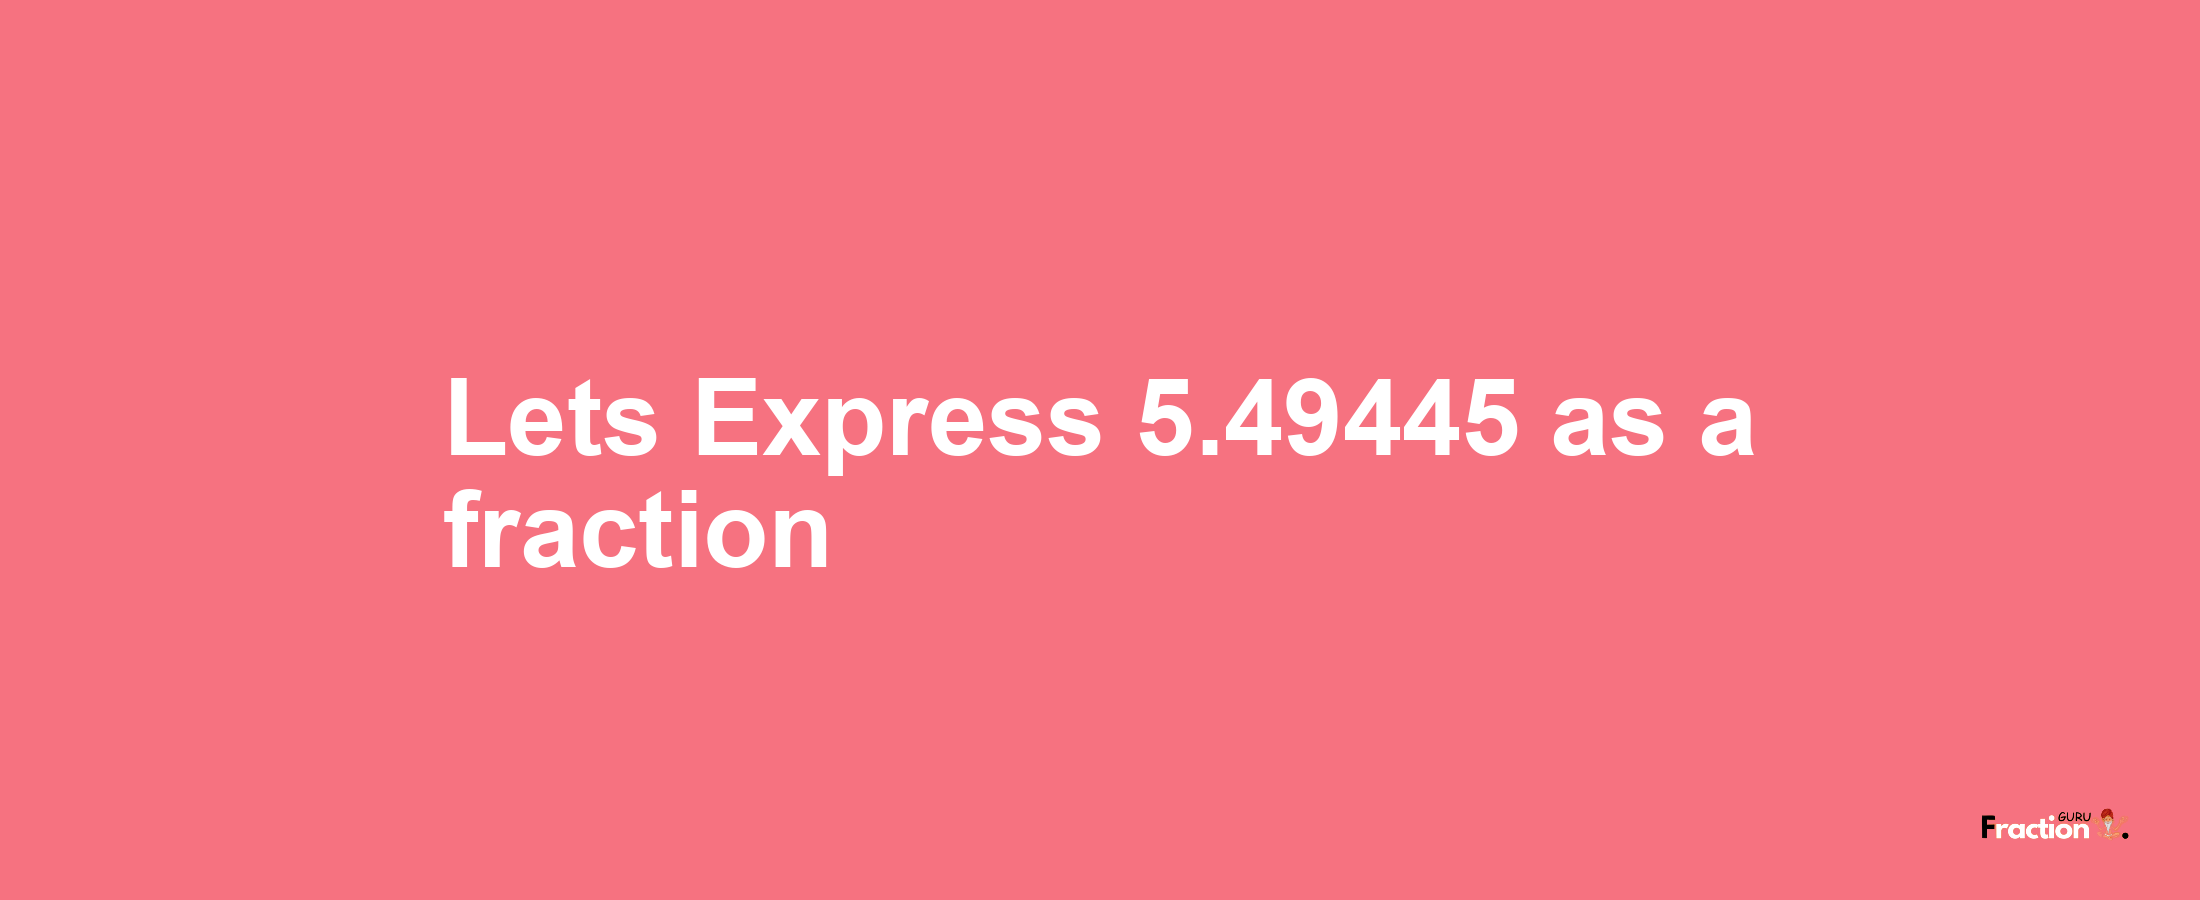 Lets Express 5.49445 as afraction